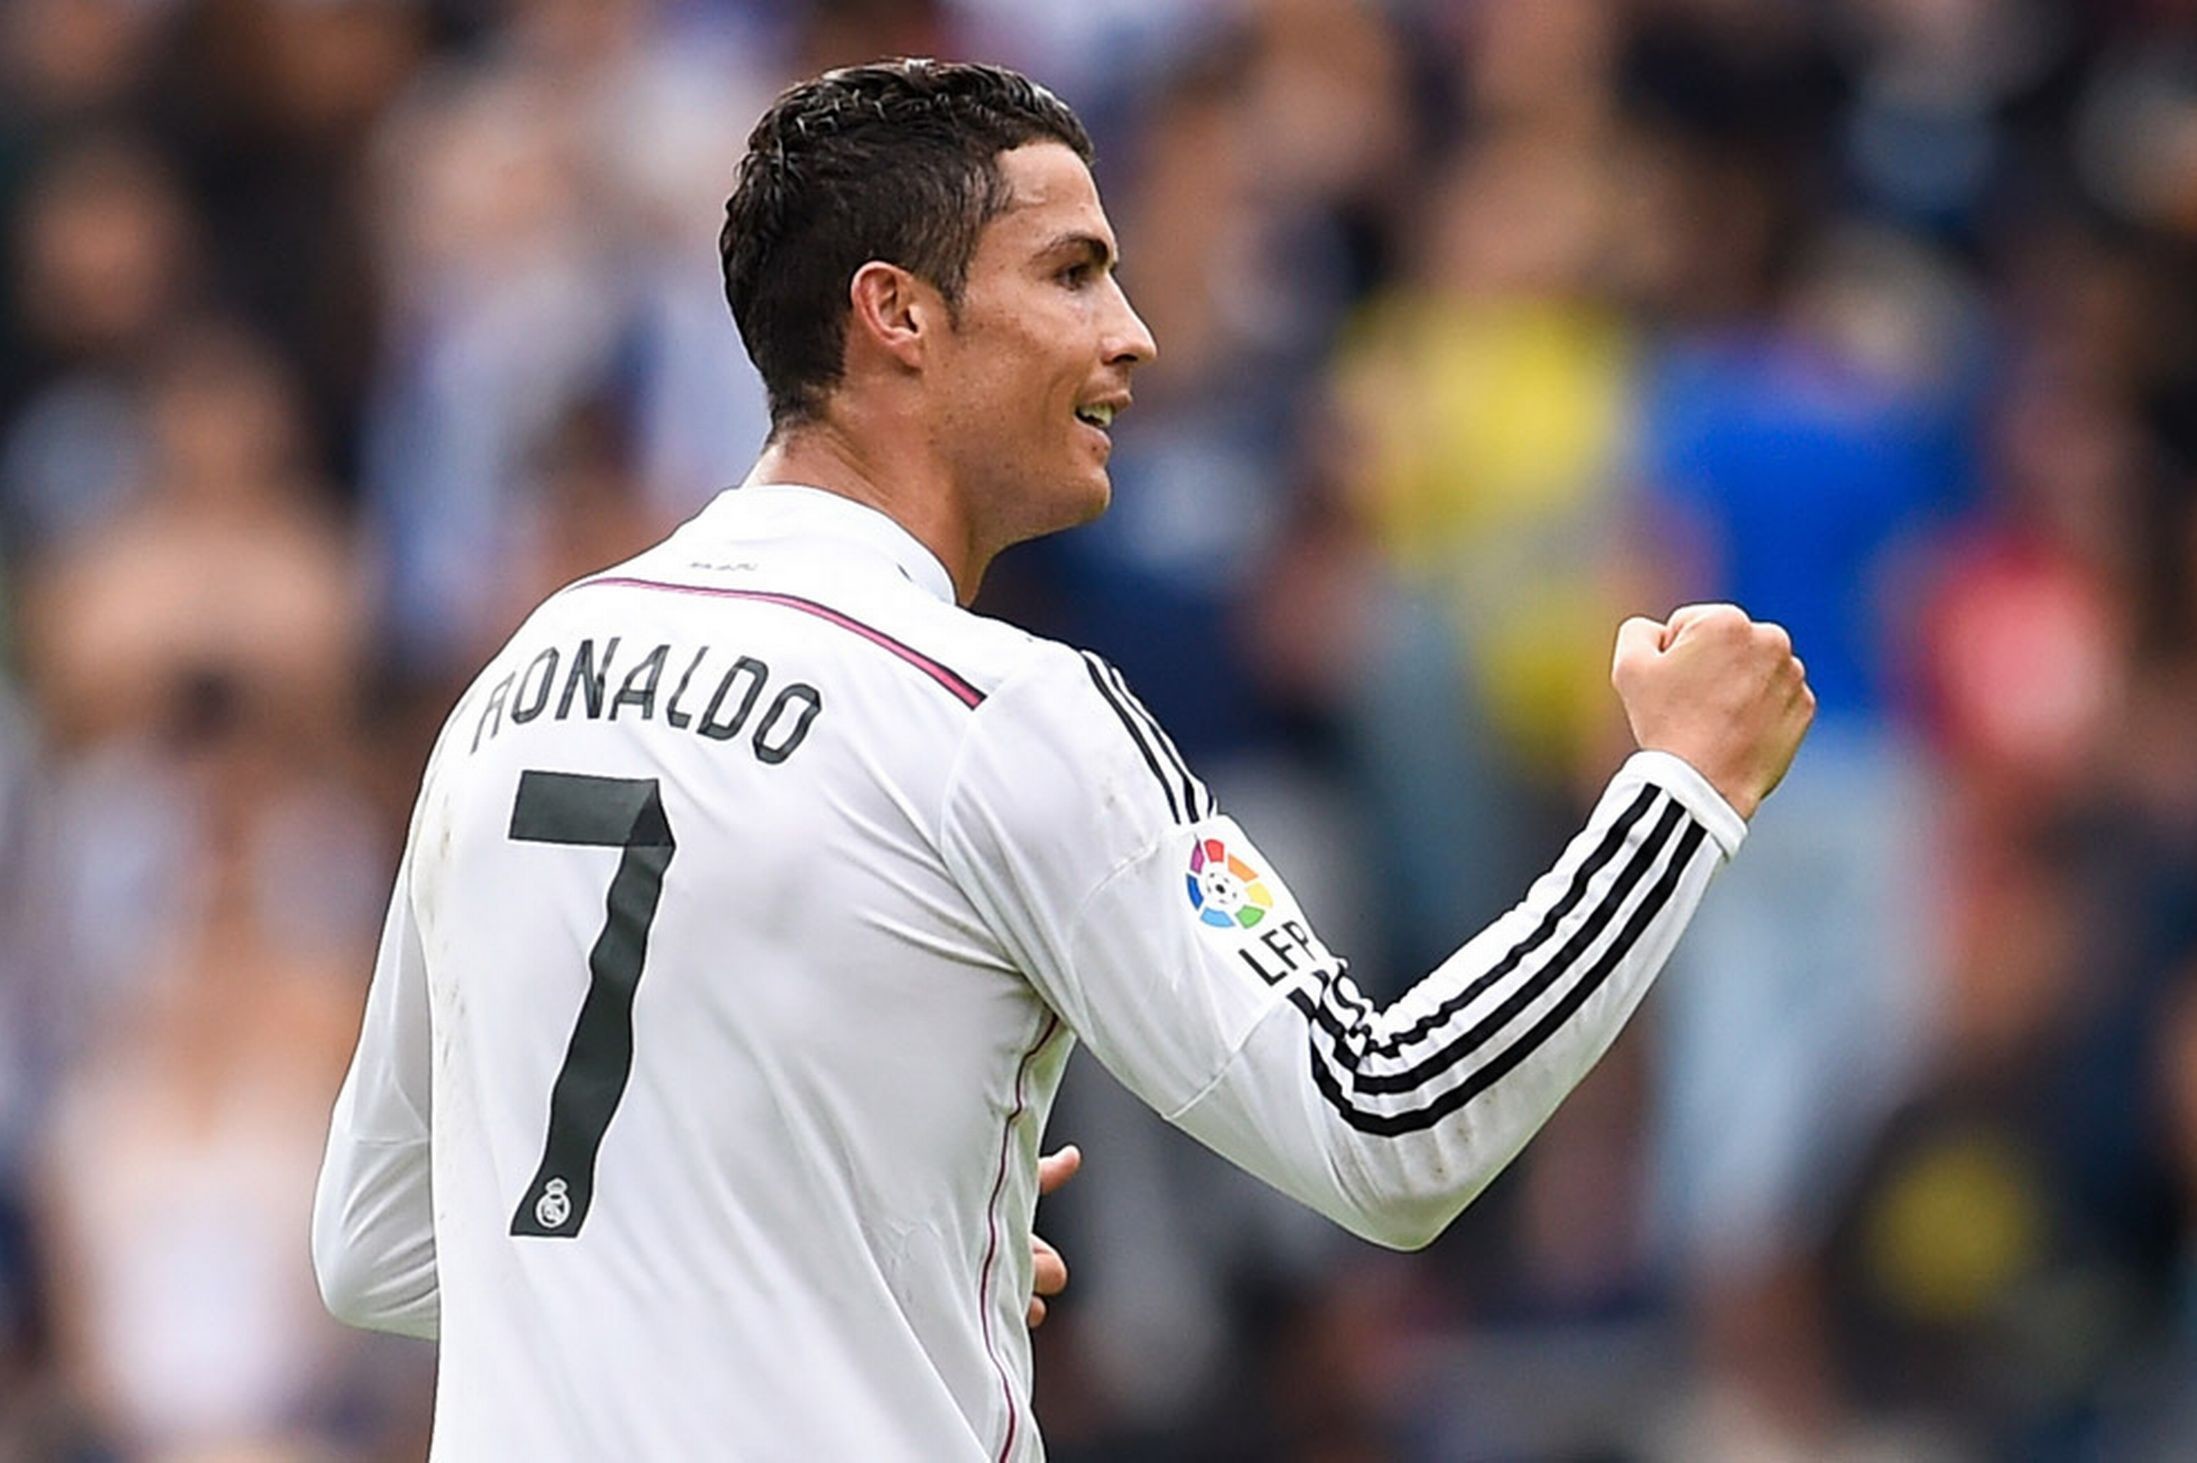 cr7 hd wallpapers 1080p,player,football player,team sport,championship,sports